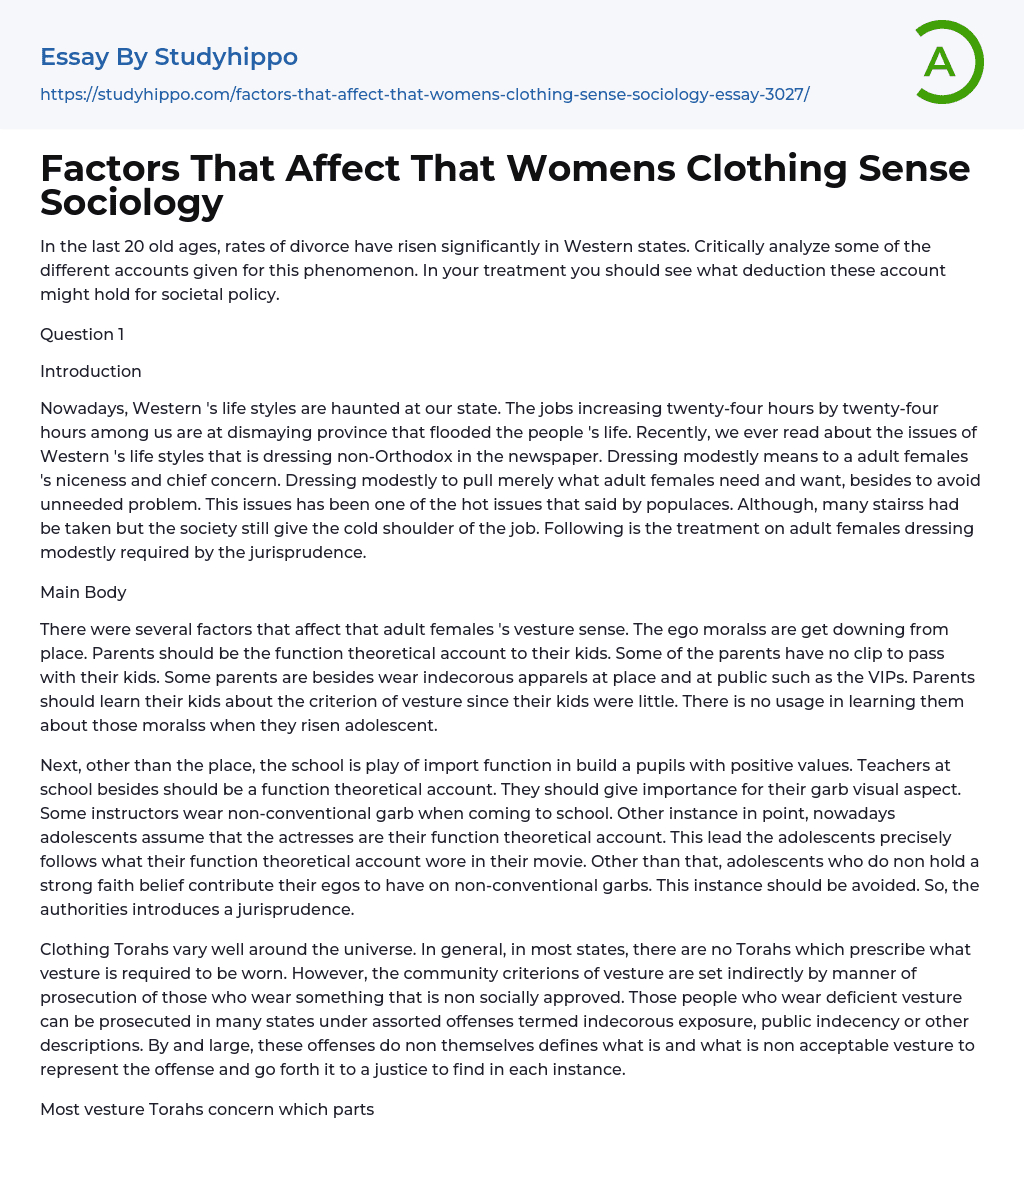 Factors That Affect That Womens Clothing Sense Sociology Essay Example